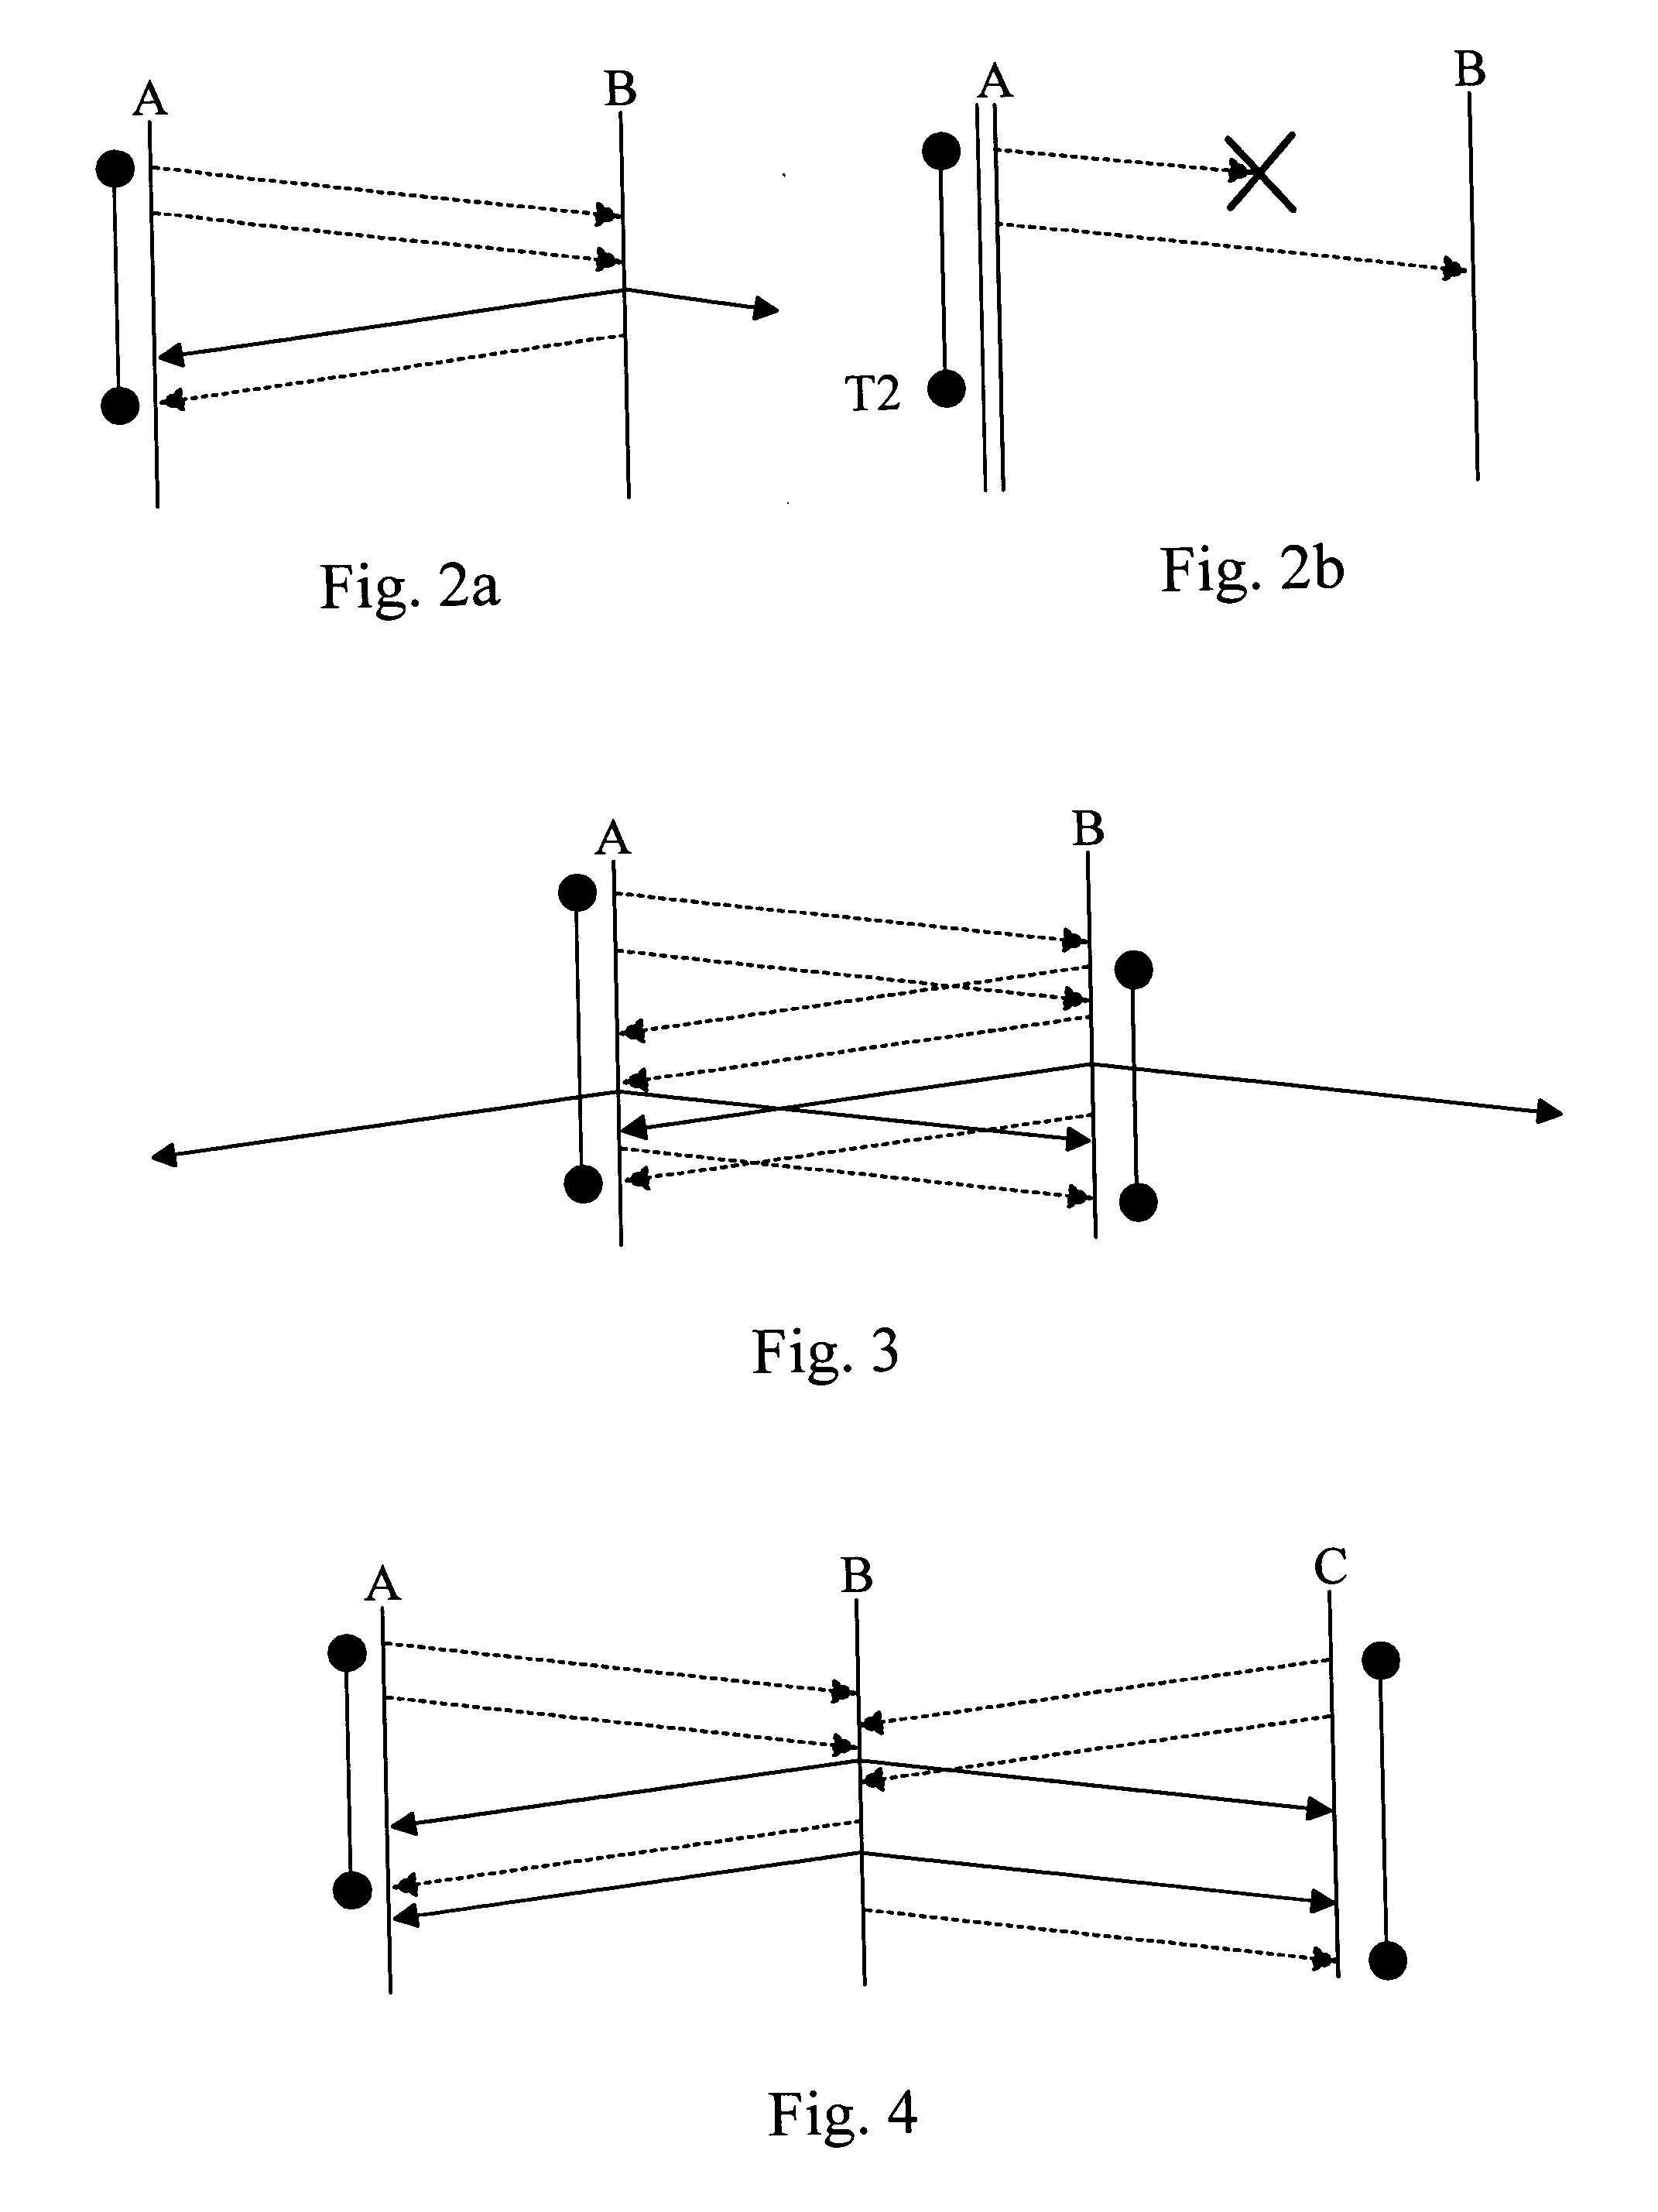 Failure detection of path information corresponding to a transmission path